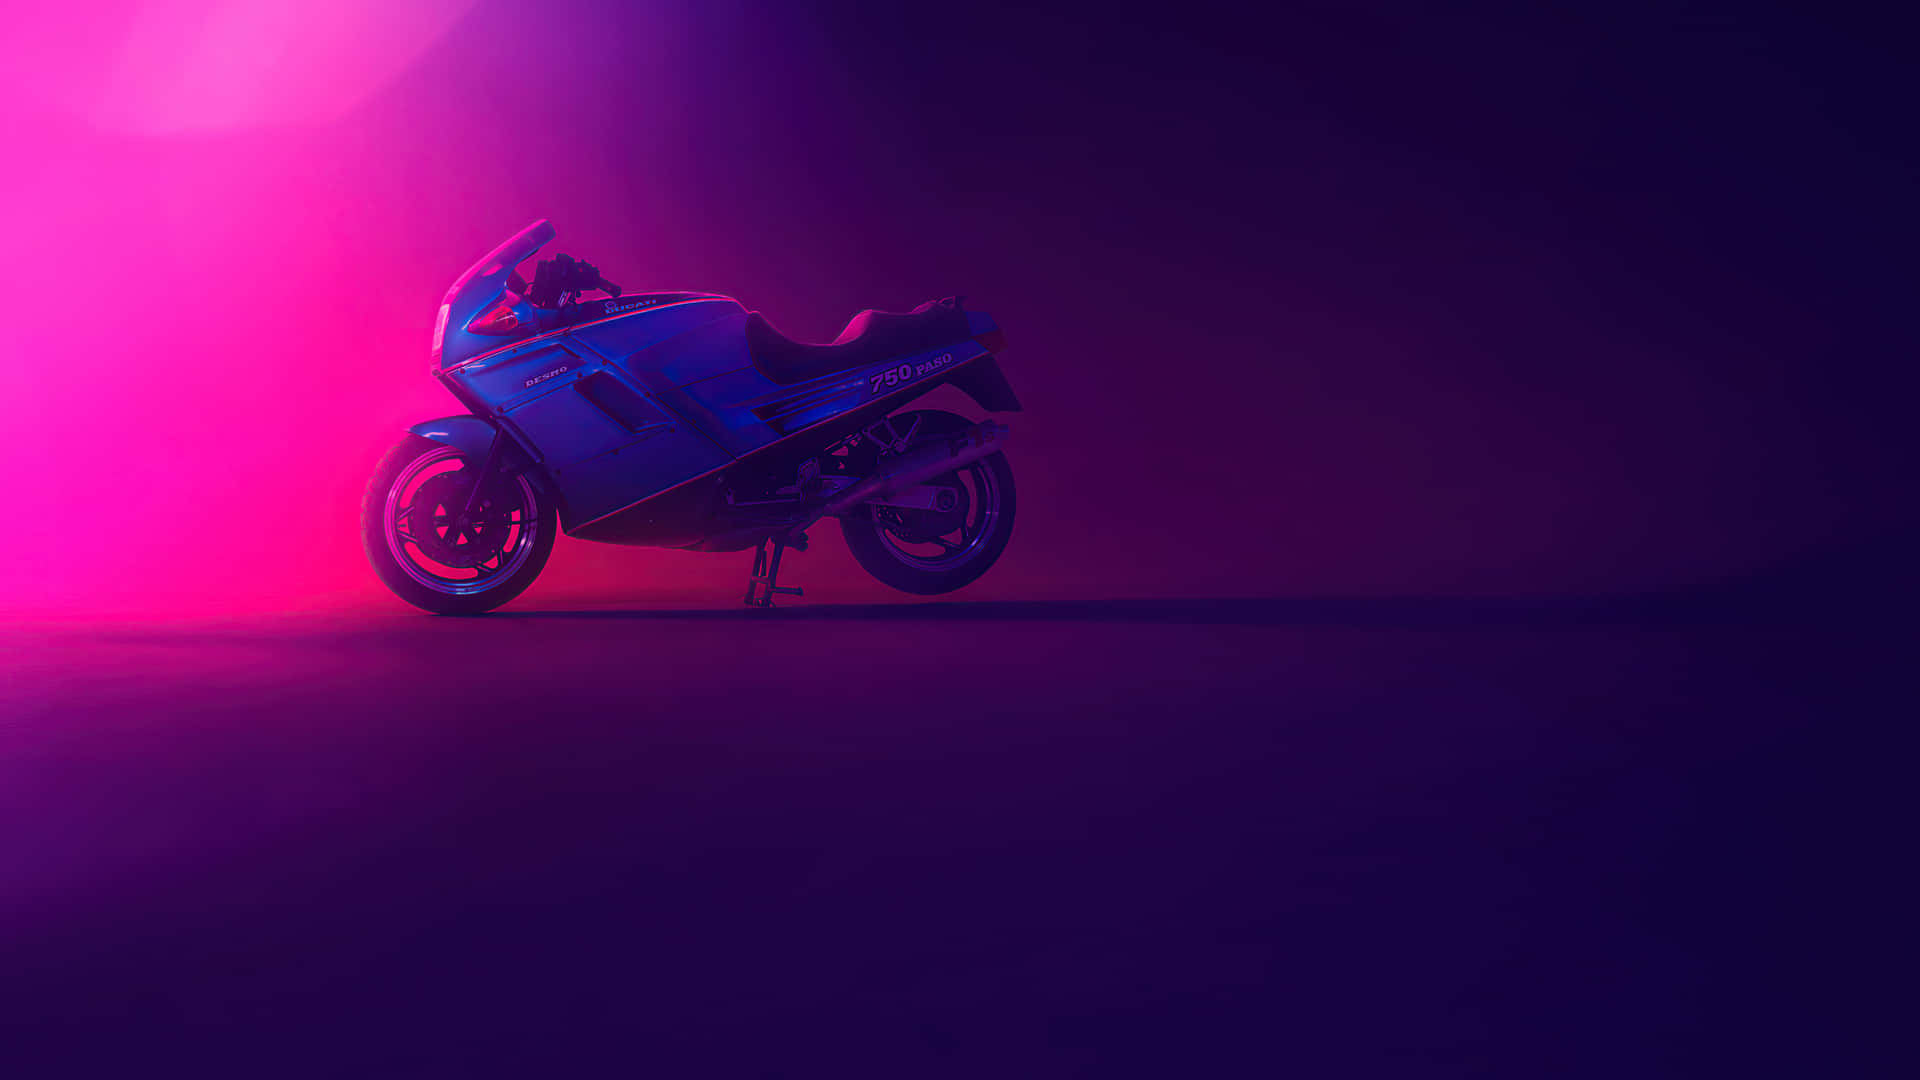 2560x1440 Ducati Motorcycle Picture